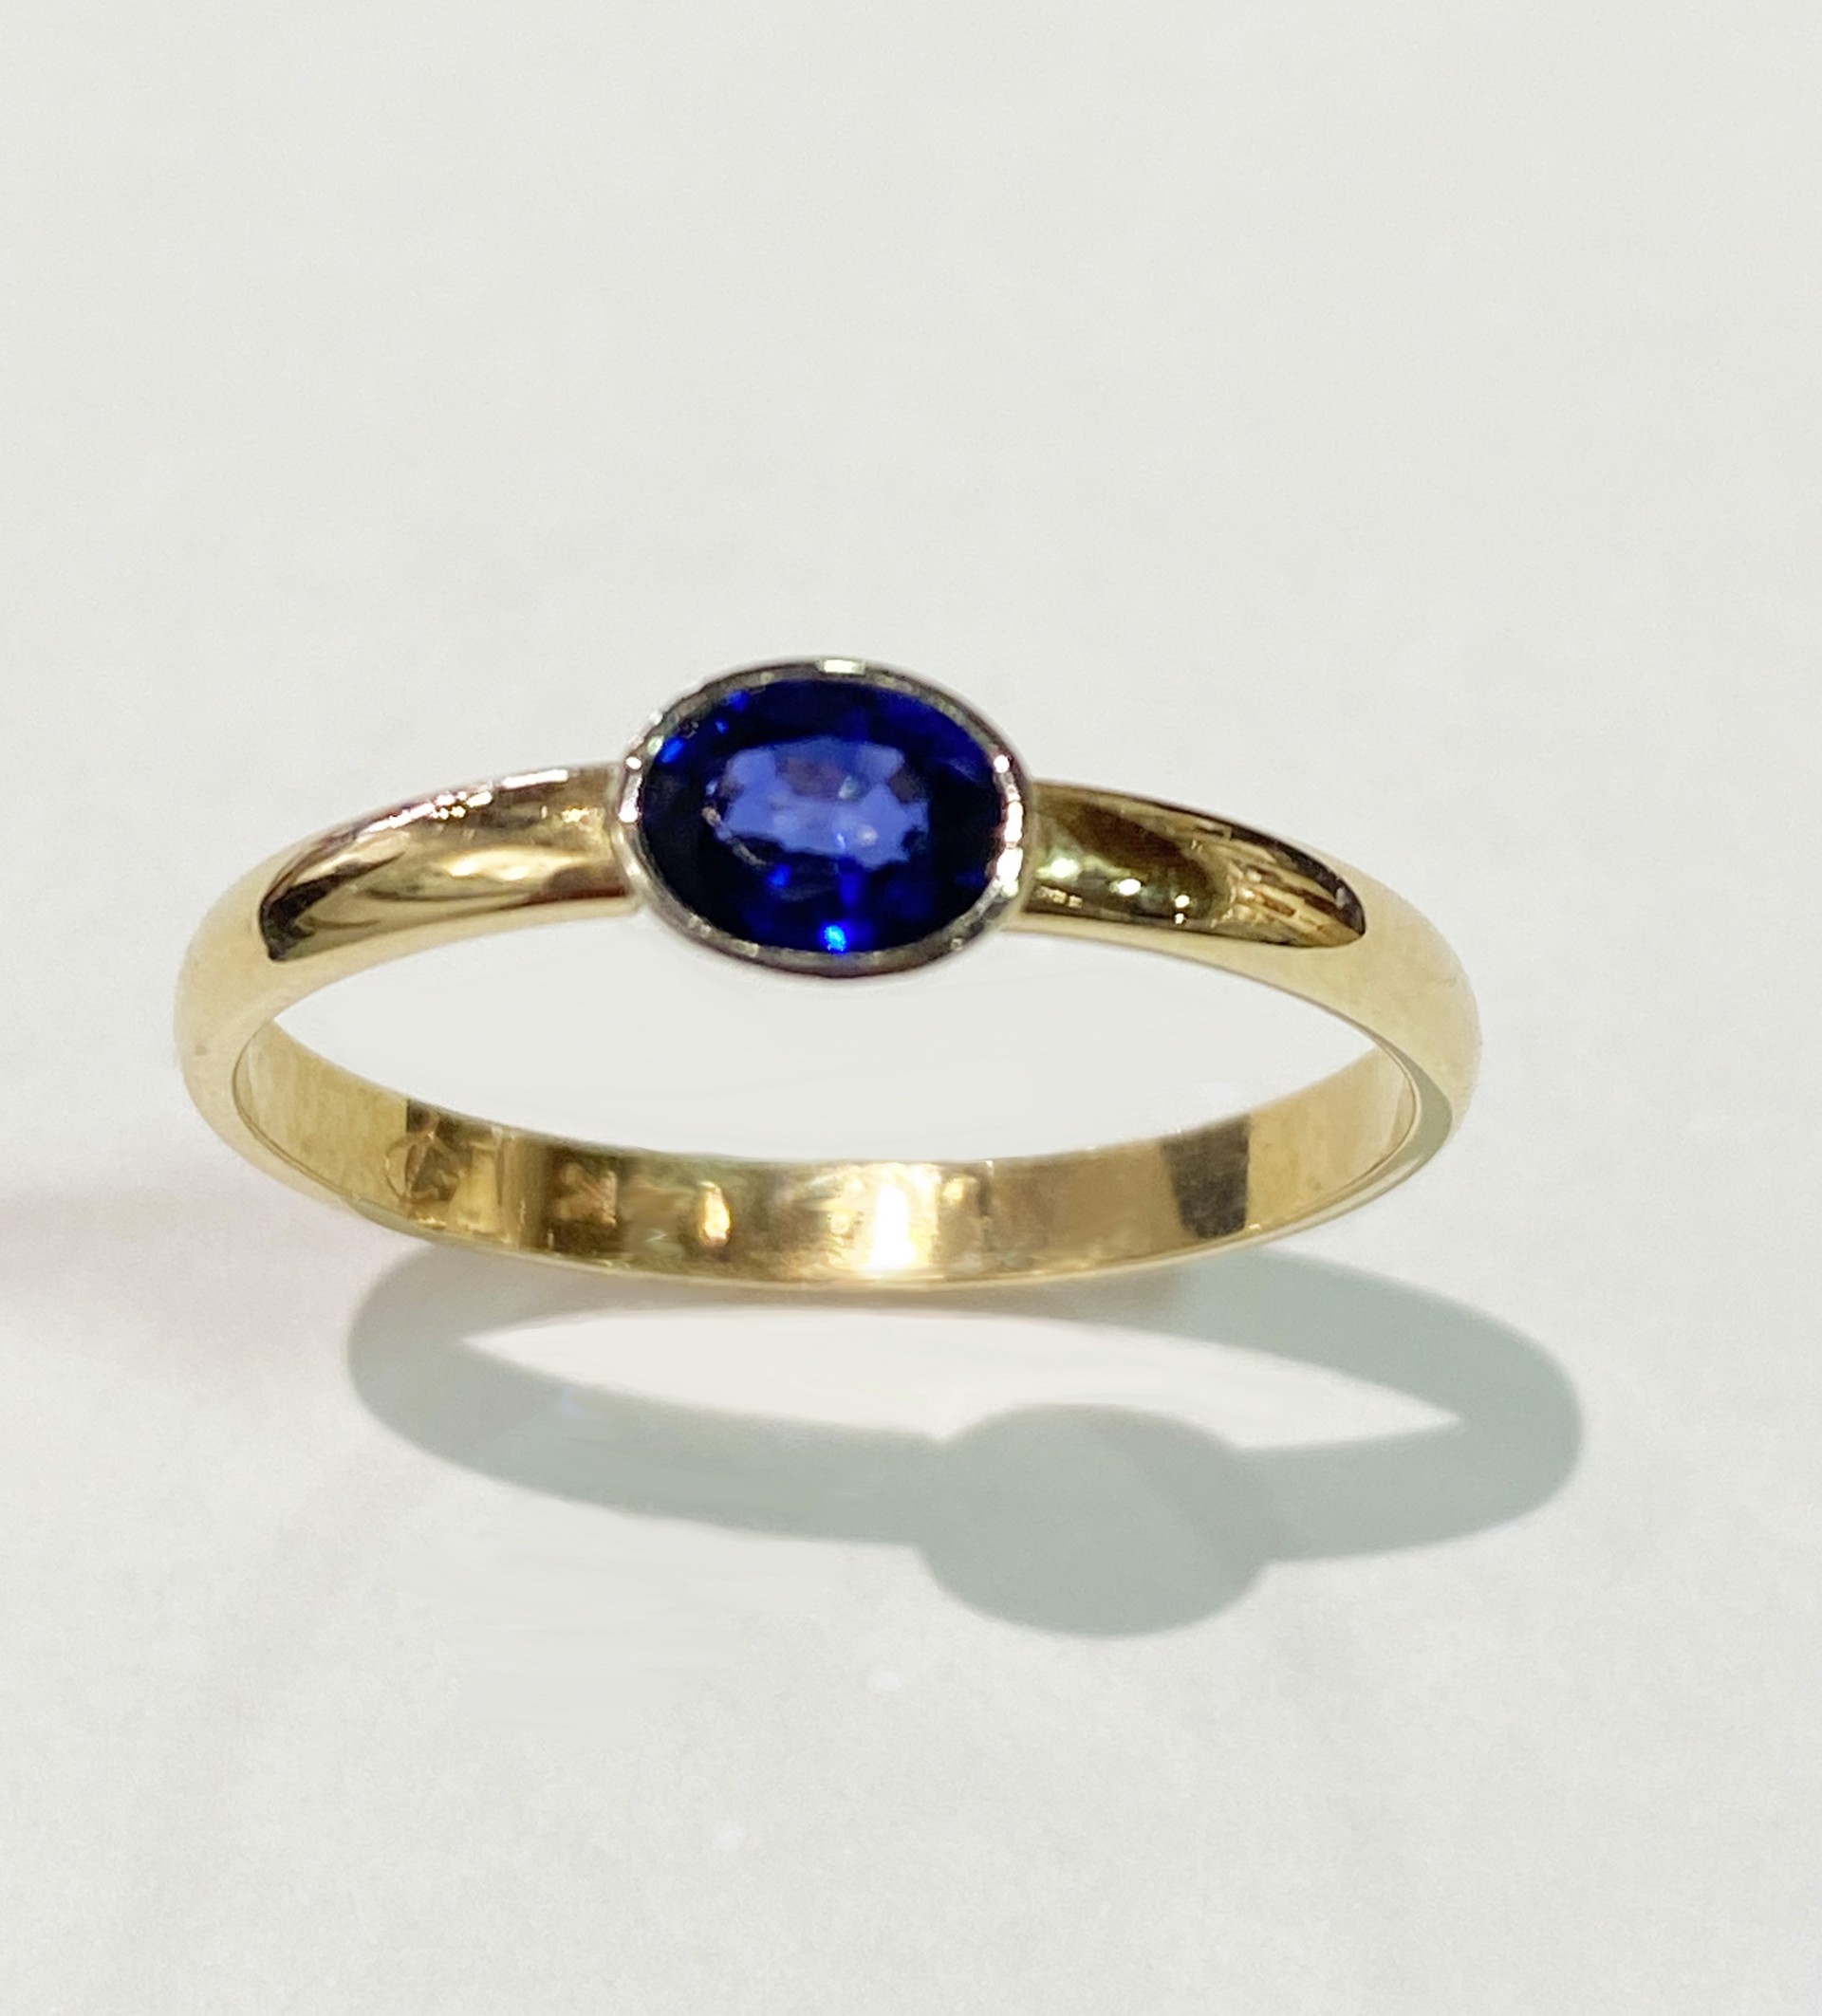 Sapphire Ring by D'ETTE DELFORGE